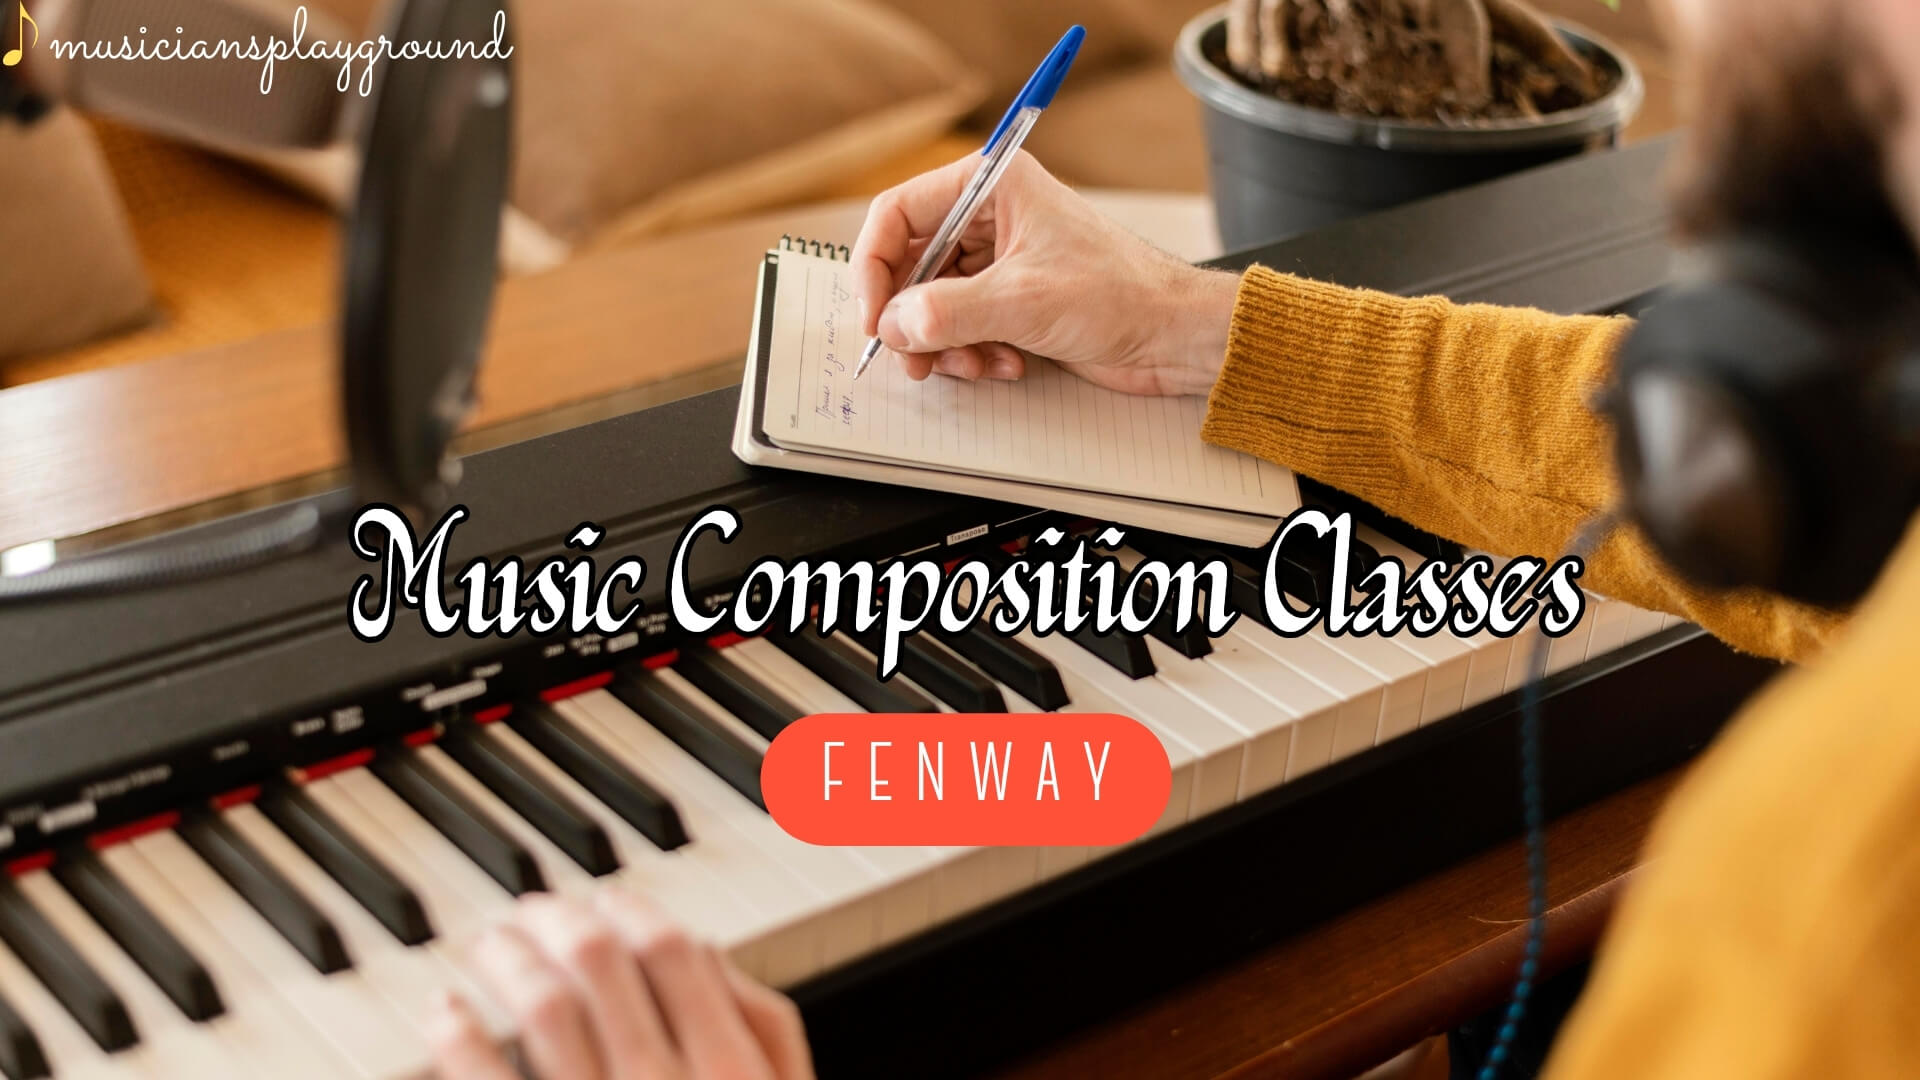 Music Composition Classes in Fenway: Enhance Your Musical Skills at Musicians Playground